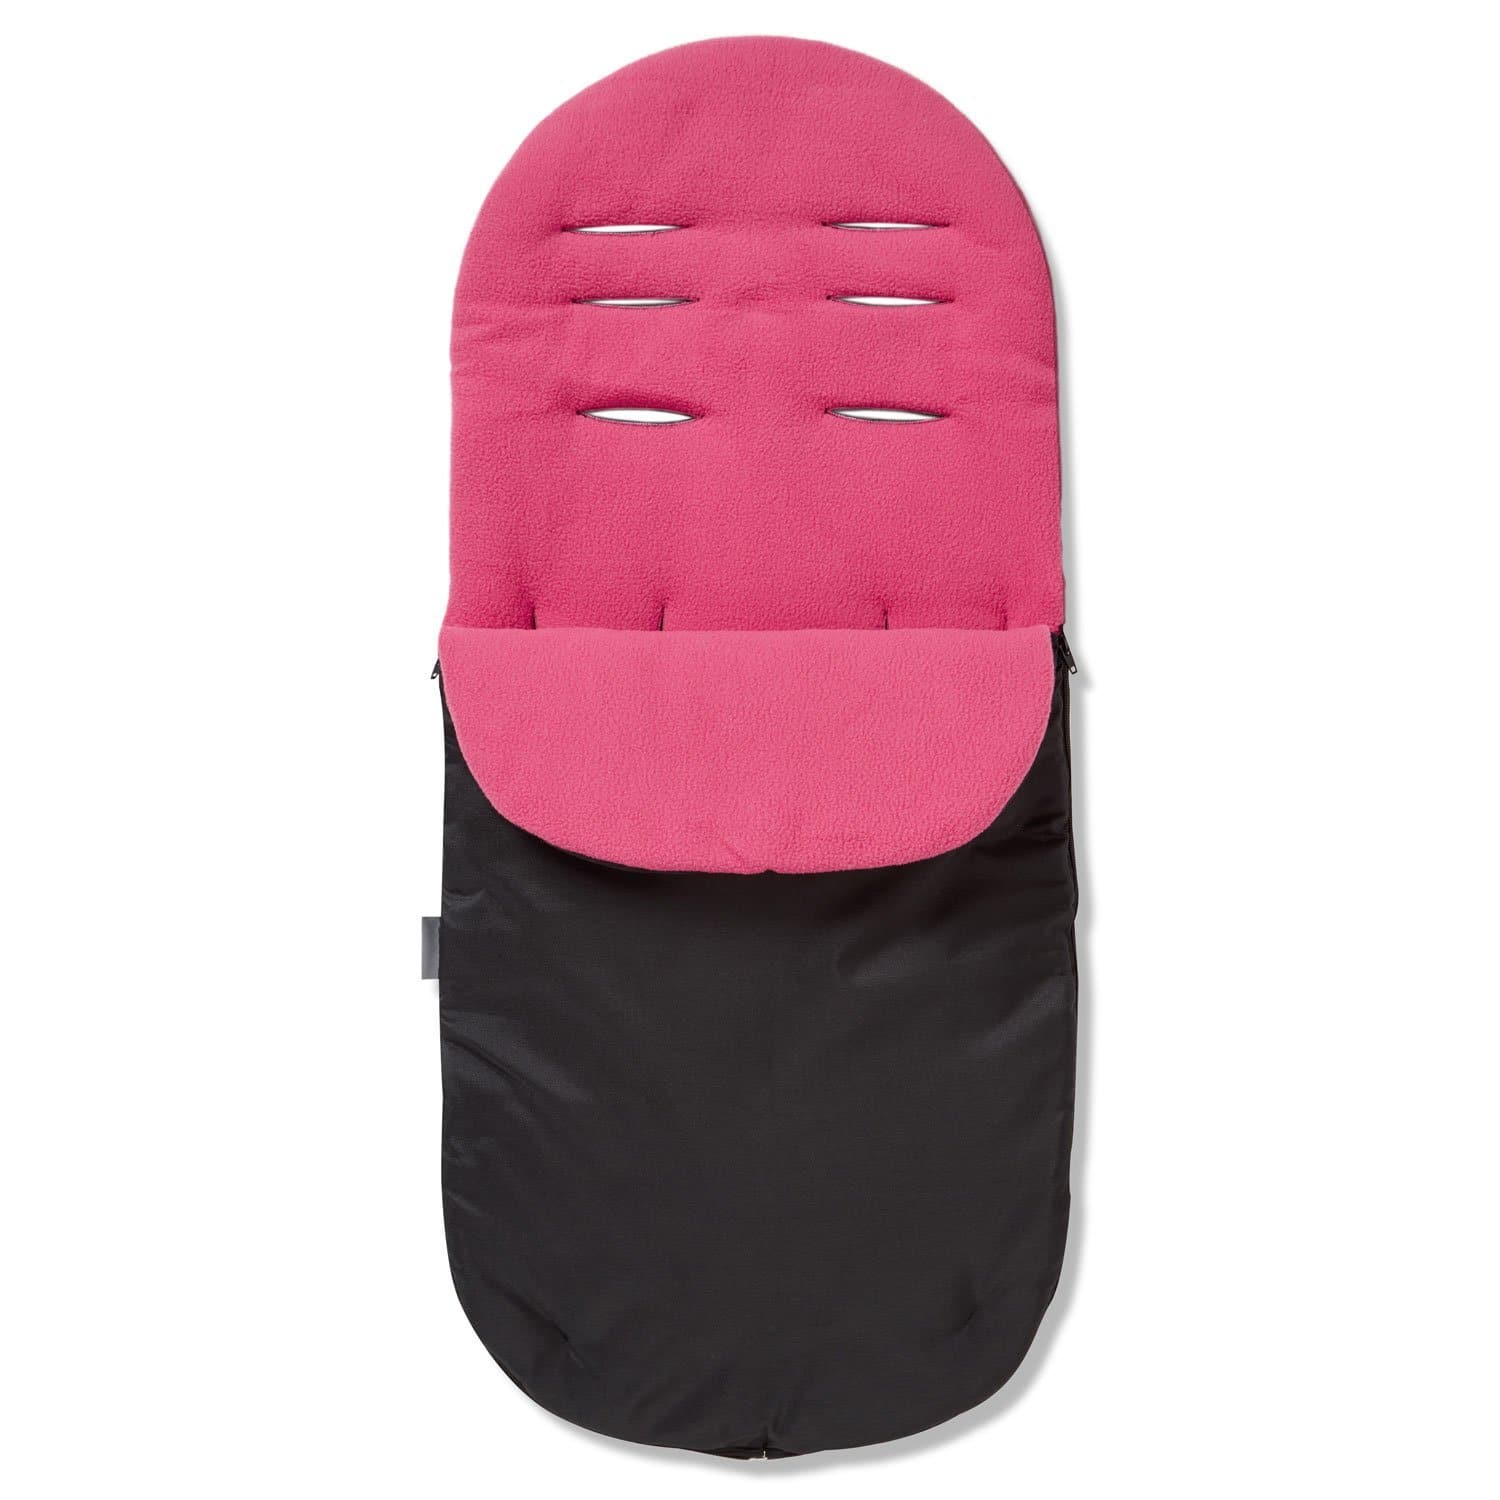 Footmuff / Cosy Toes Compatible with Red Kite - For Your Little One